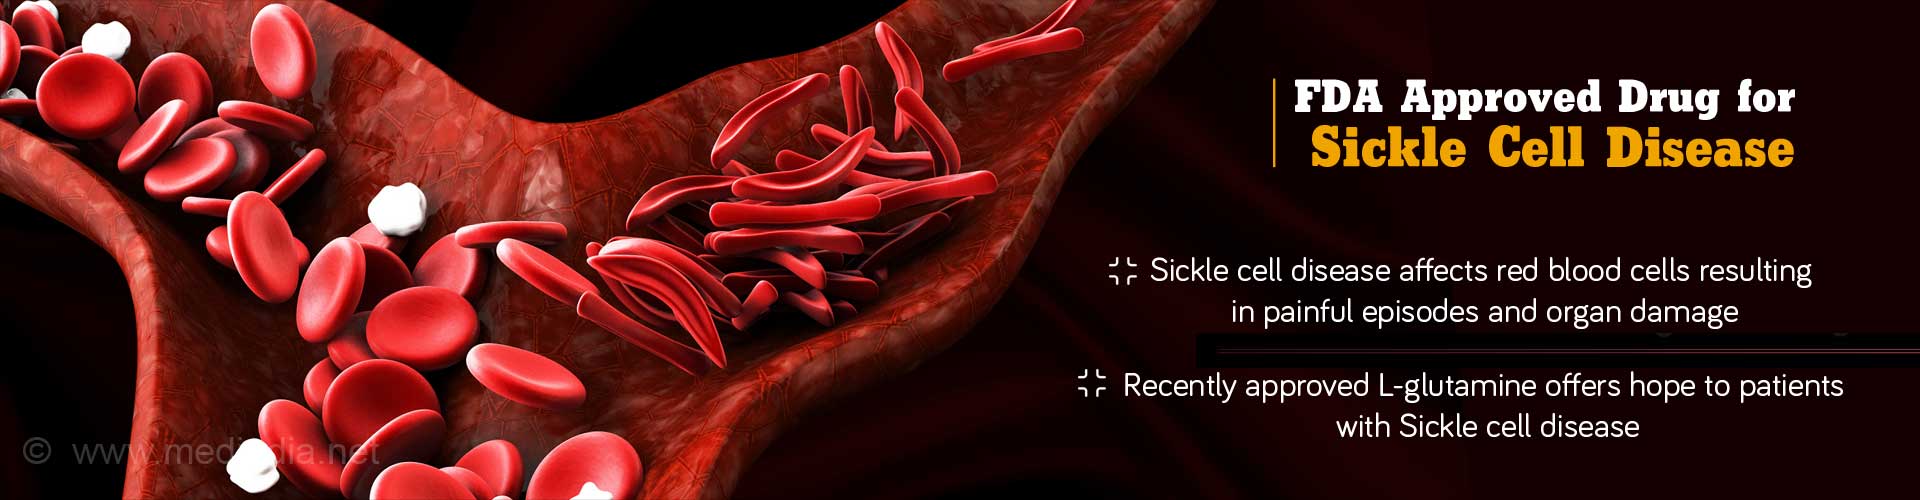 FDA approved drug for sickle cell disease
- Sickle cell disease affects red blood cells resulting in painful episodes and organ damage
Recently approved L-glutamine offers hope to patients with Sickle cell disease